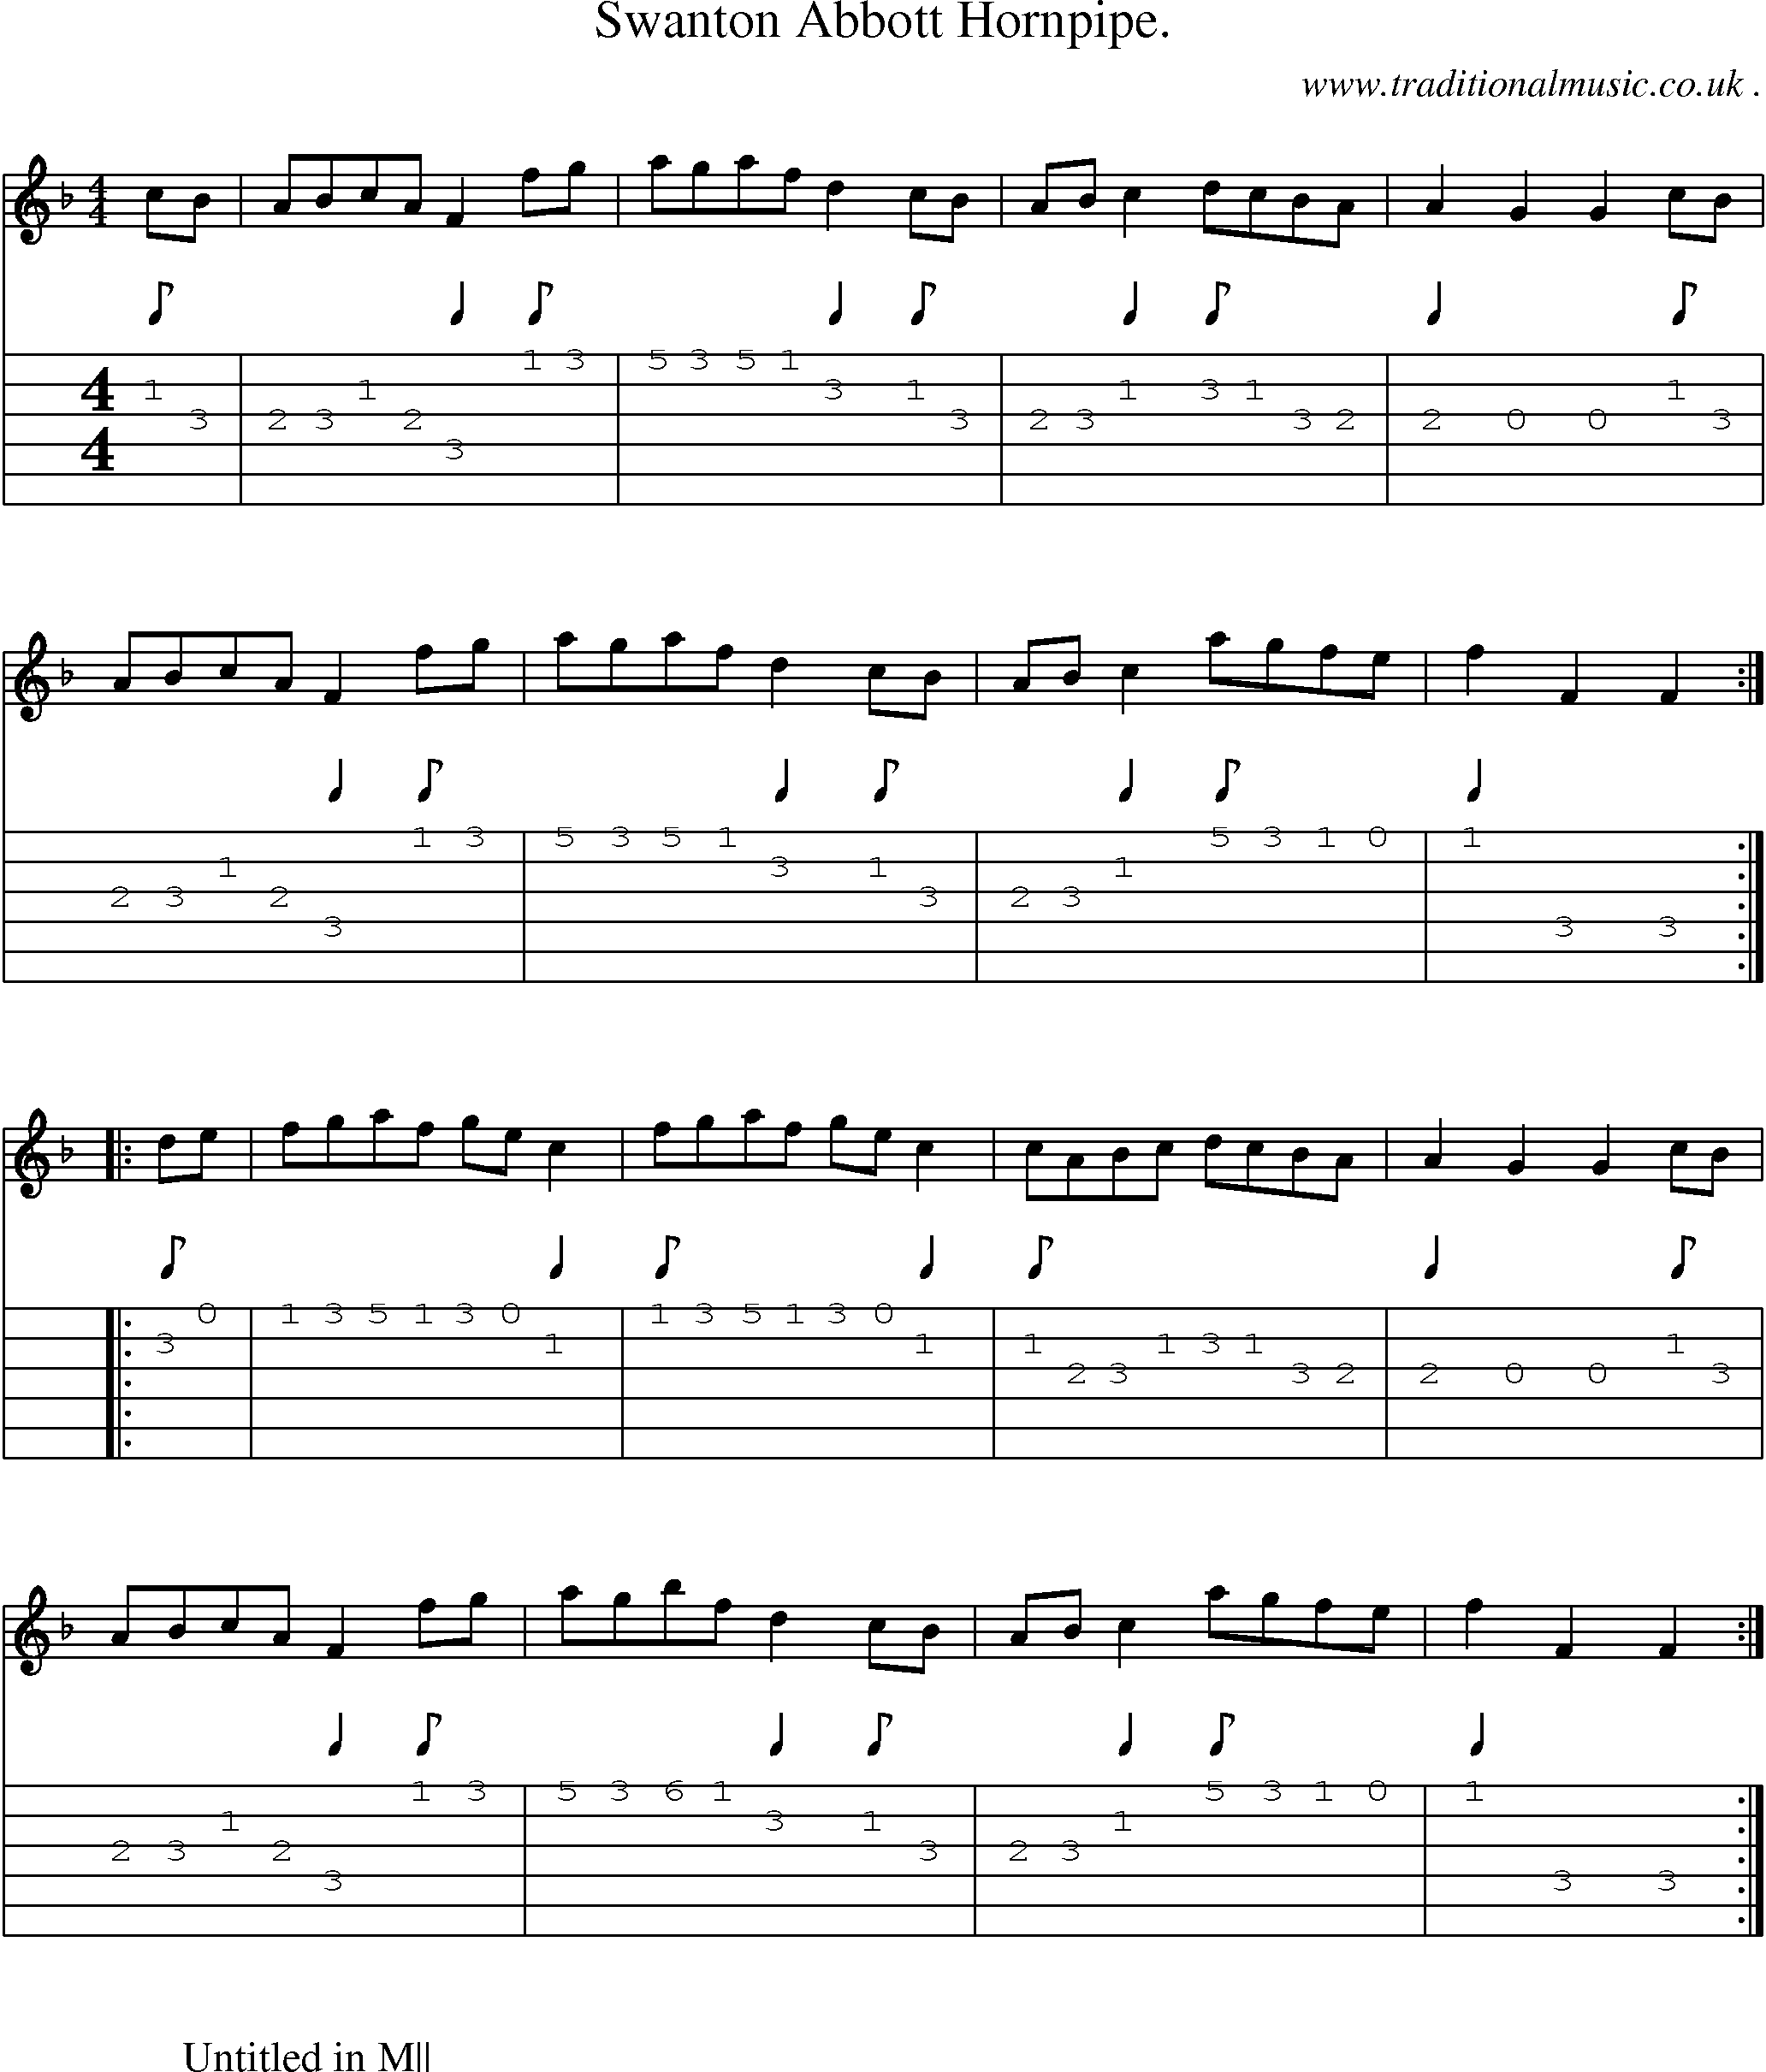 Sheet-Music and Guitar Tabs for Swanton Abbott Hornpipe